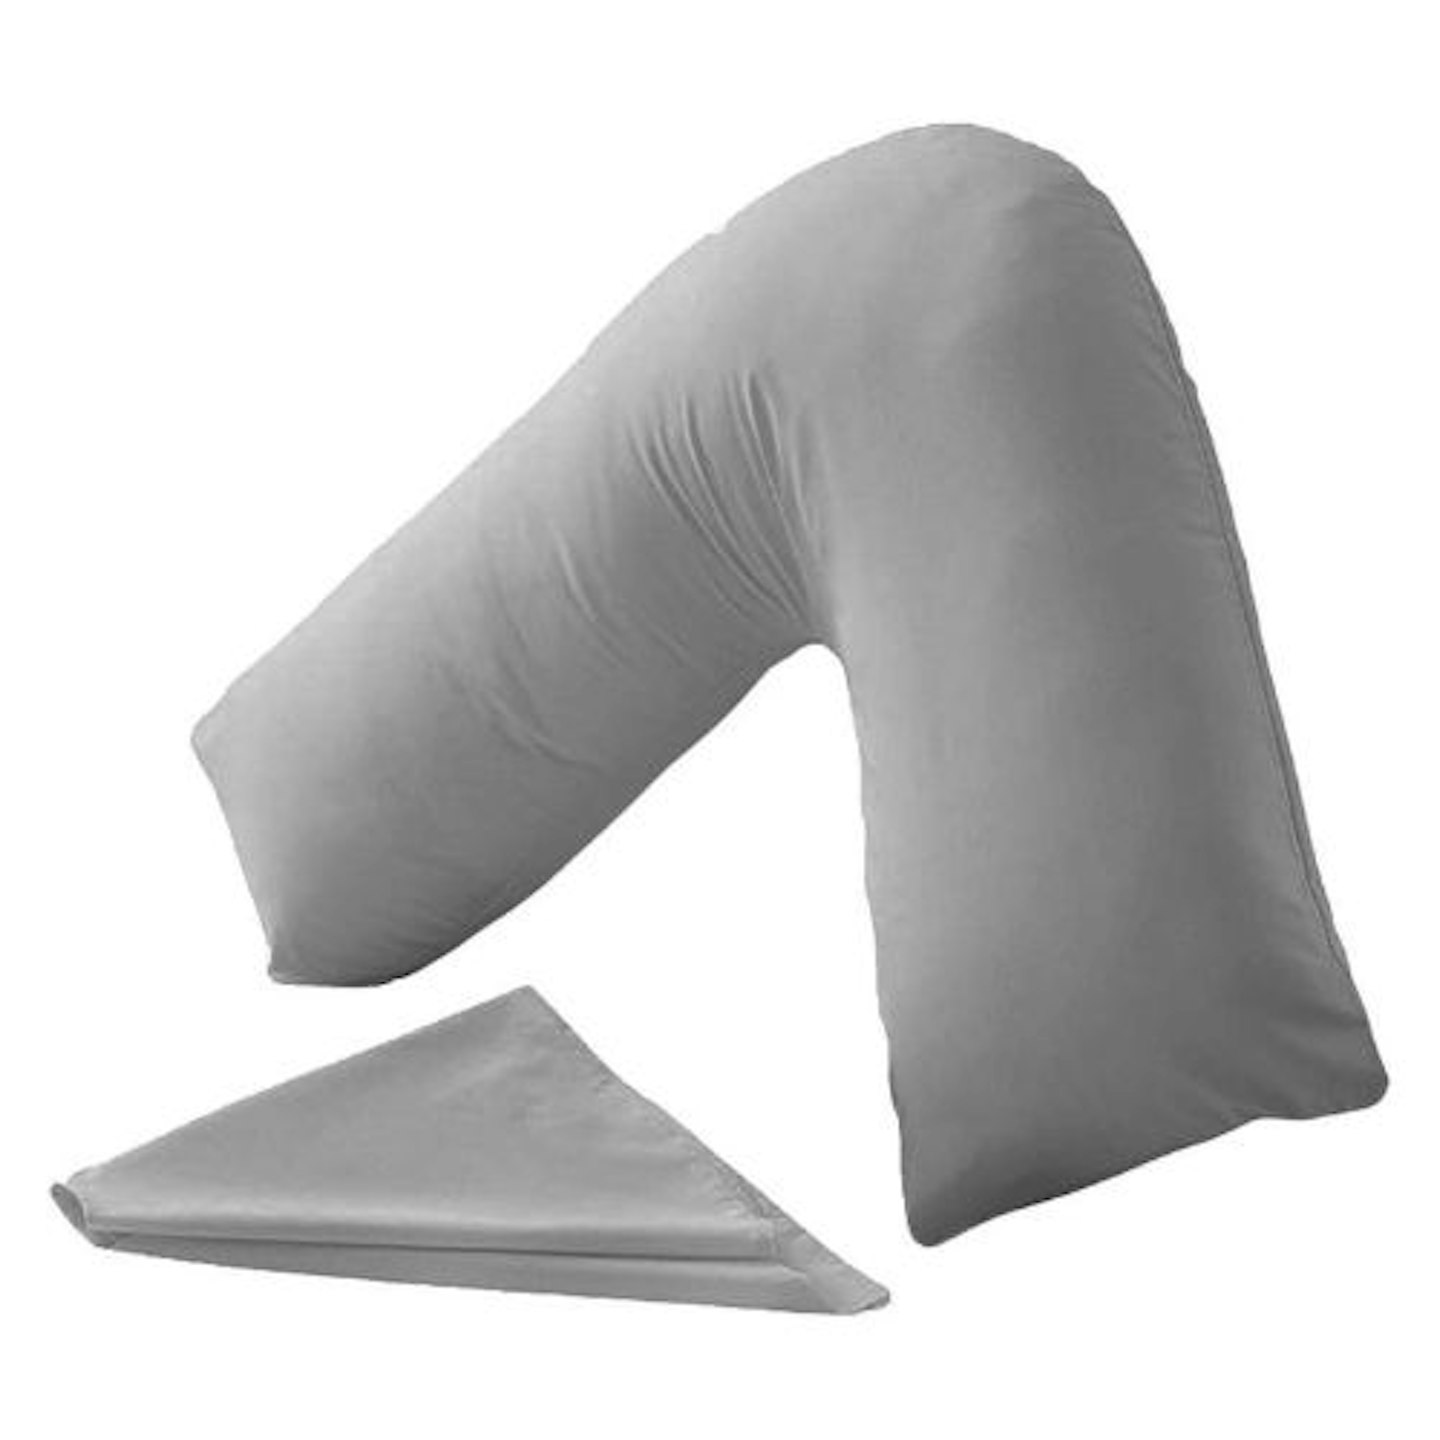 CnA Stores Orthopaedic V-Shaped Pillow Extra Cushioning Support For Head, Neck & Back (Grey, V-pillow With Cover)